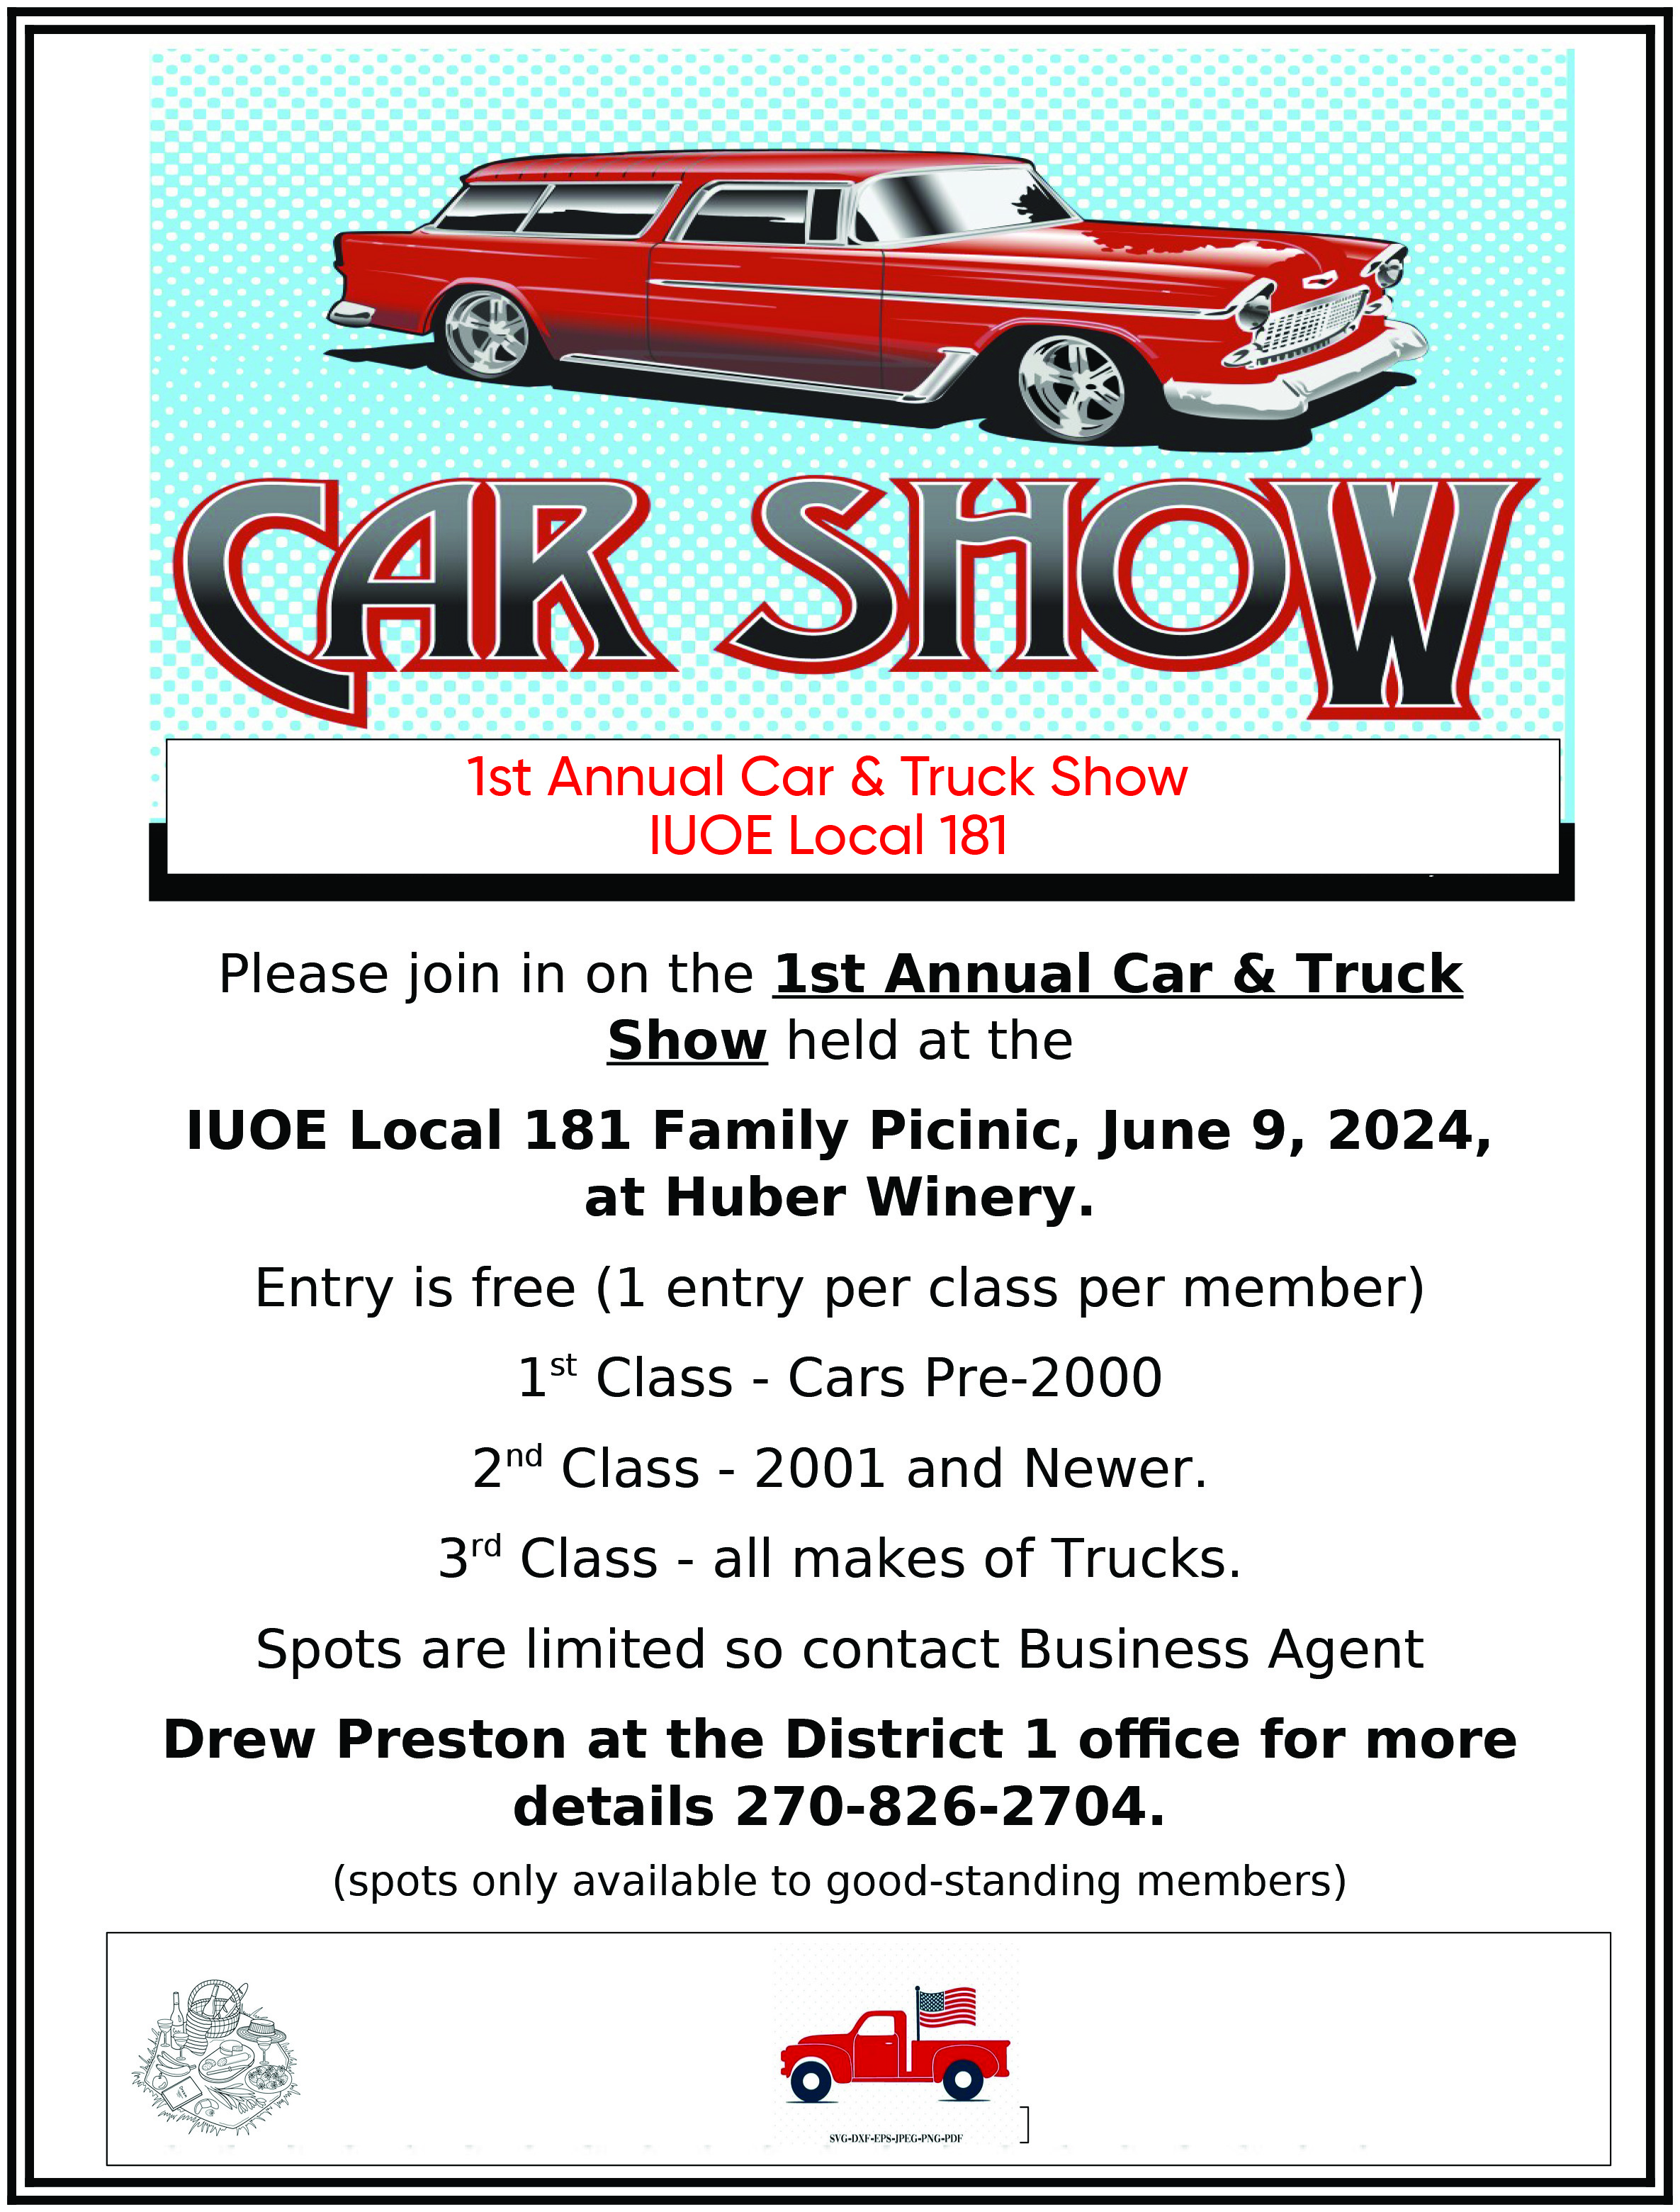 1st Annual Car & Truck Show Pamphlet